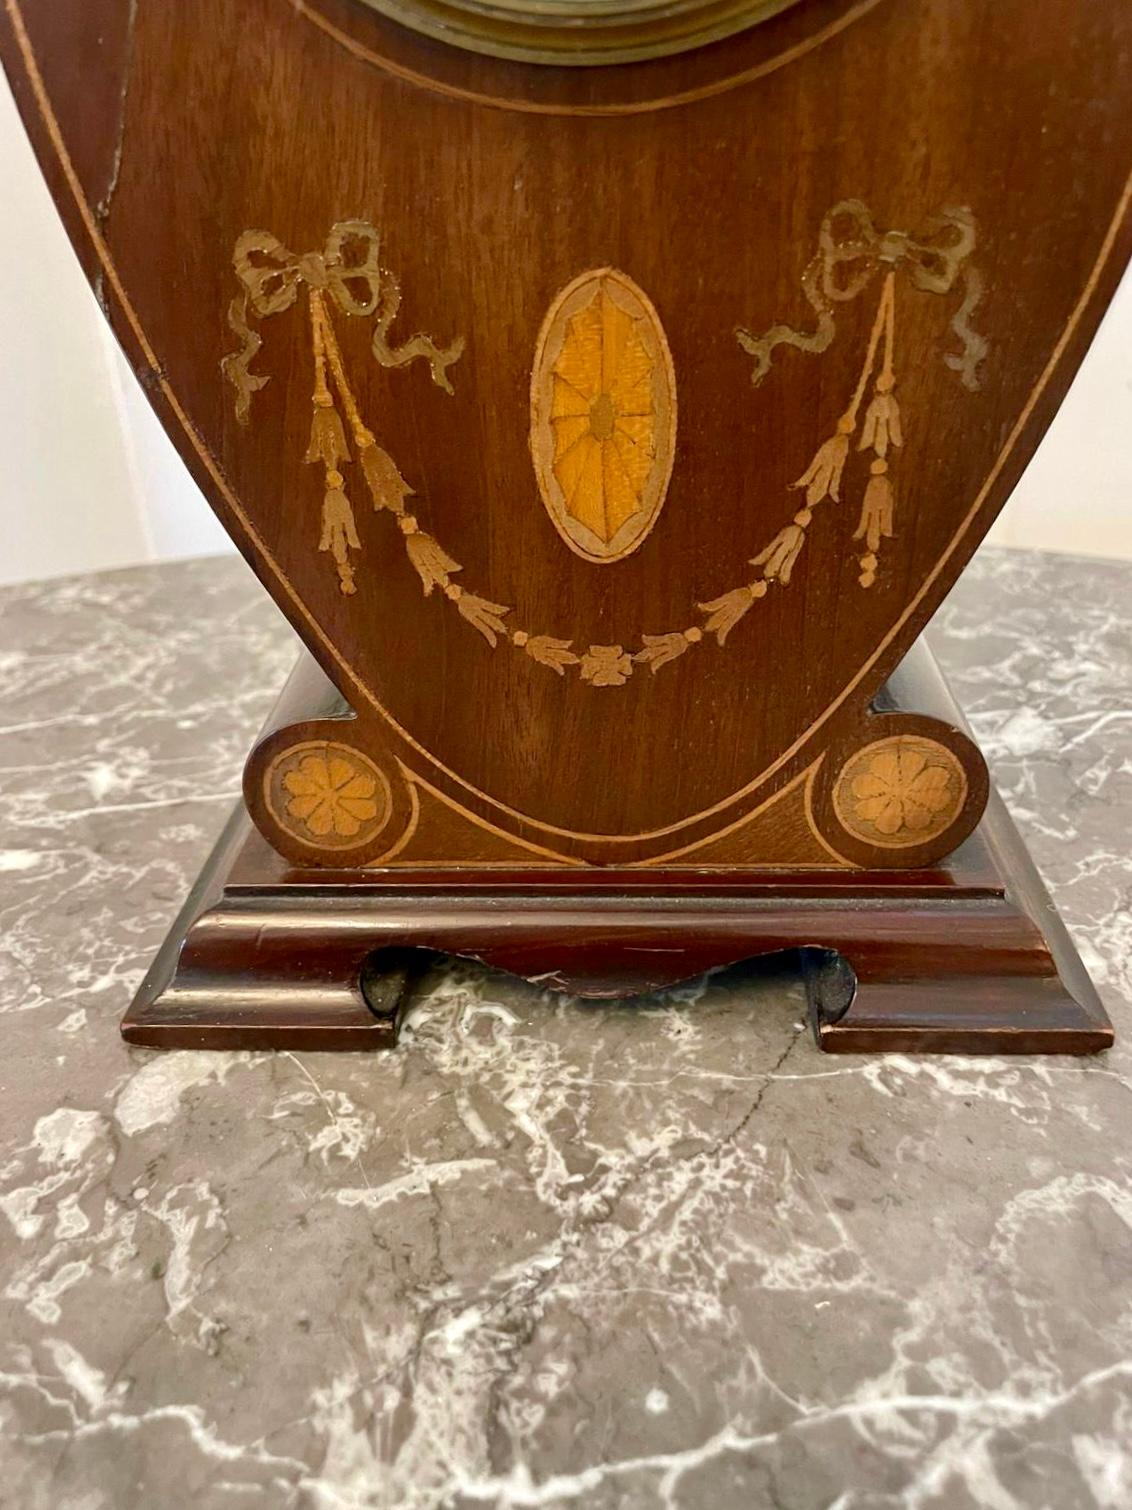 Antique Edwardian Inlaid Mahogany Mantel Clock In Good Condition For Sale In Suffolk, GB